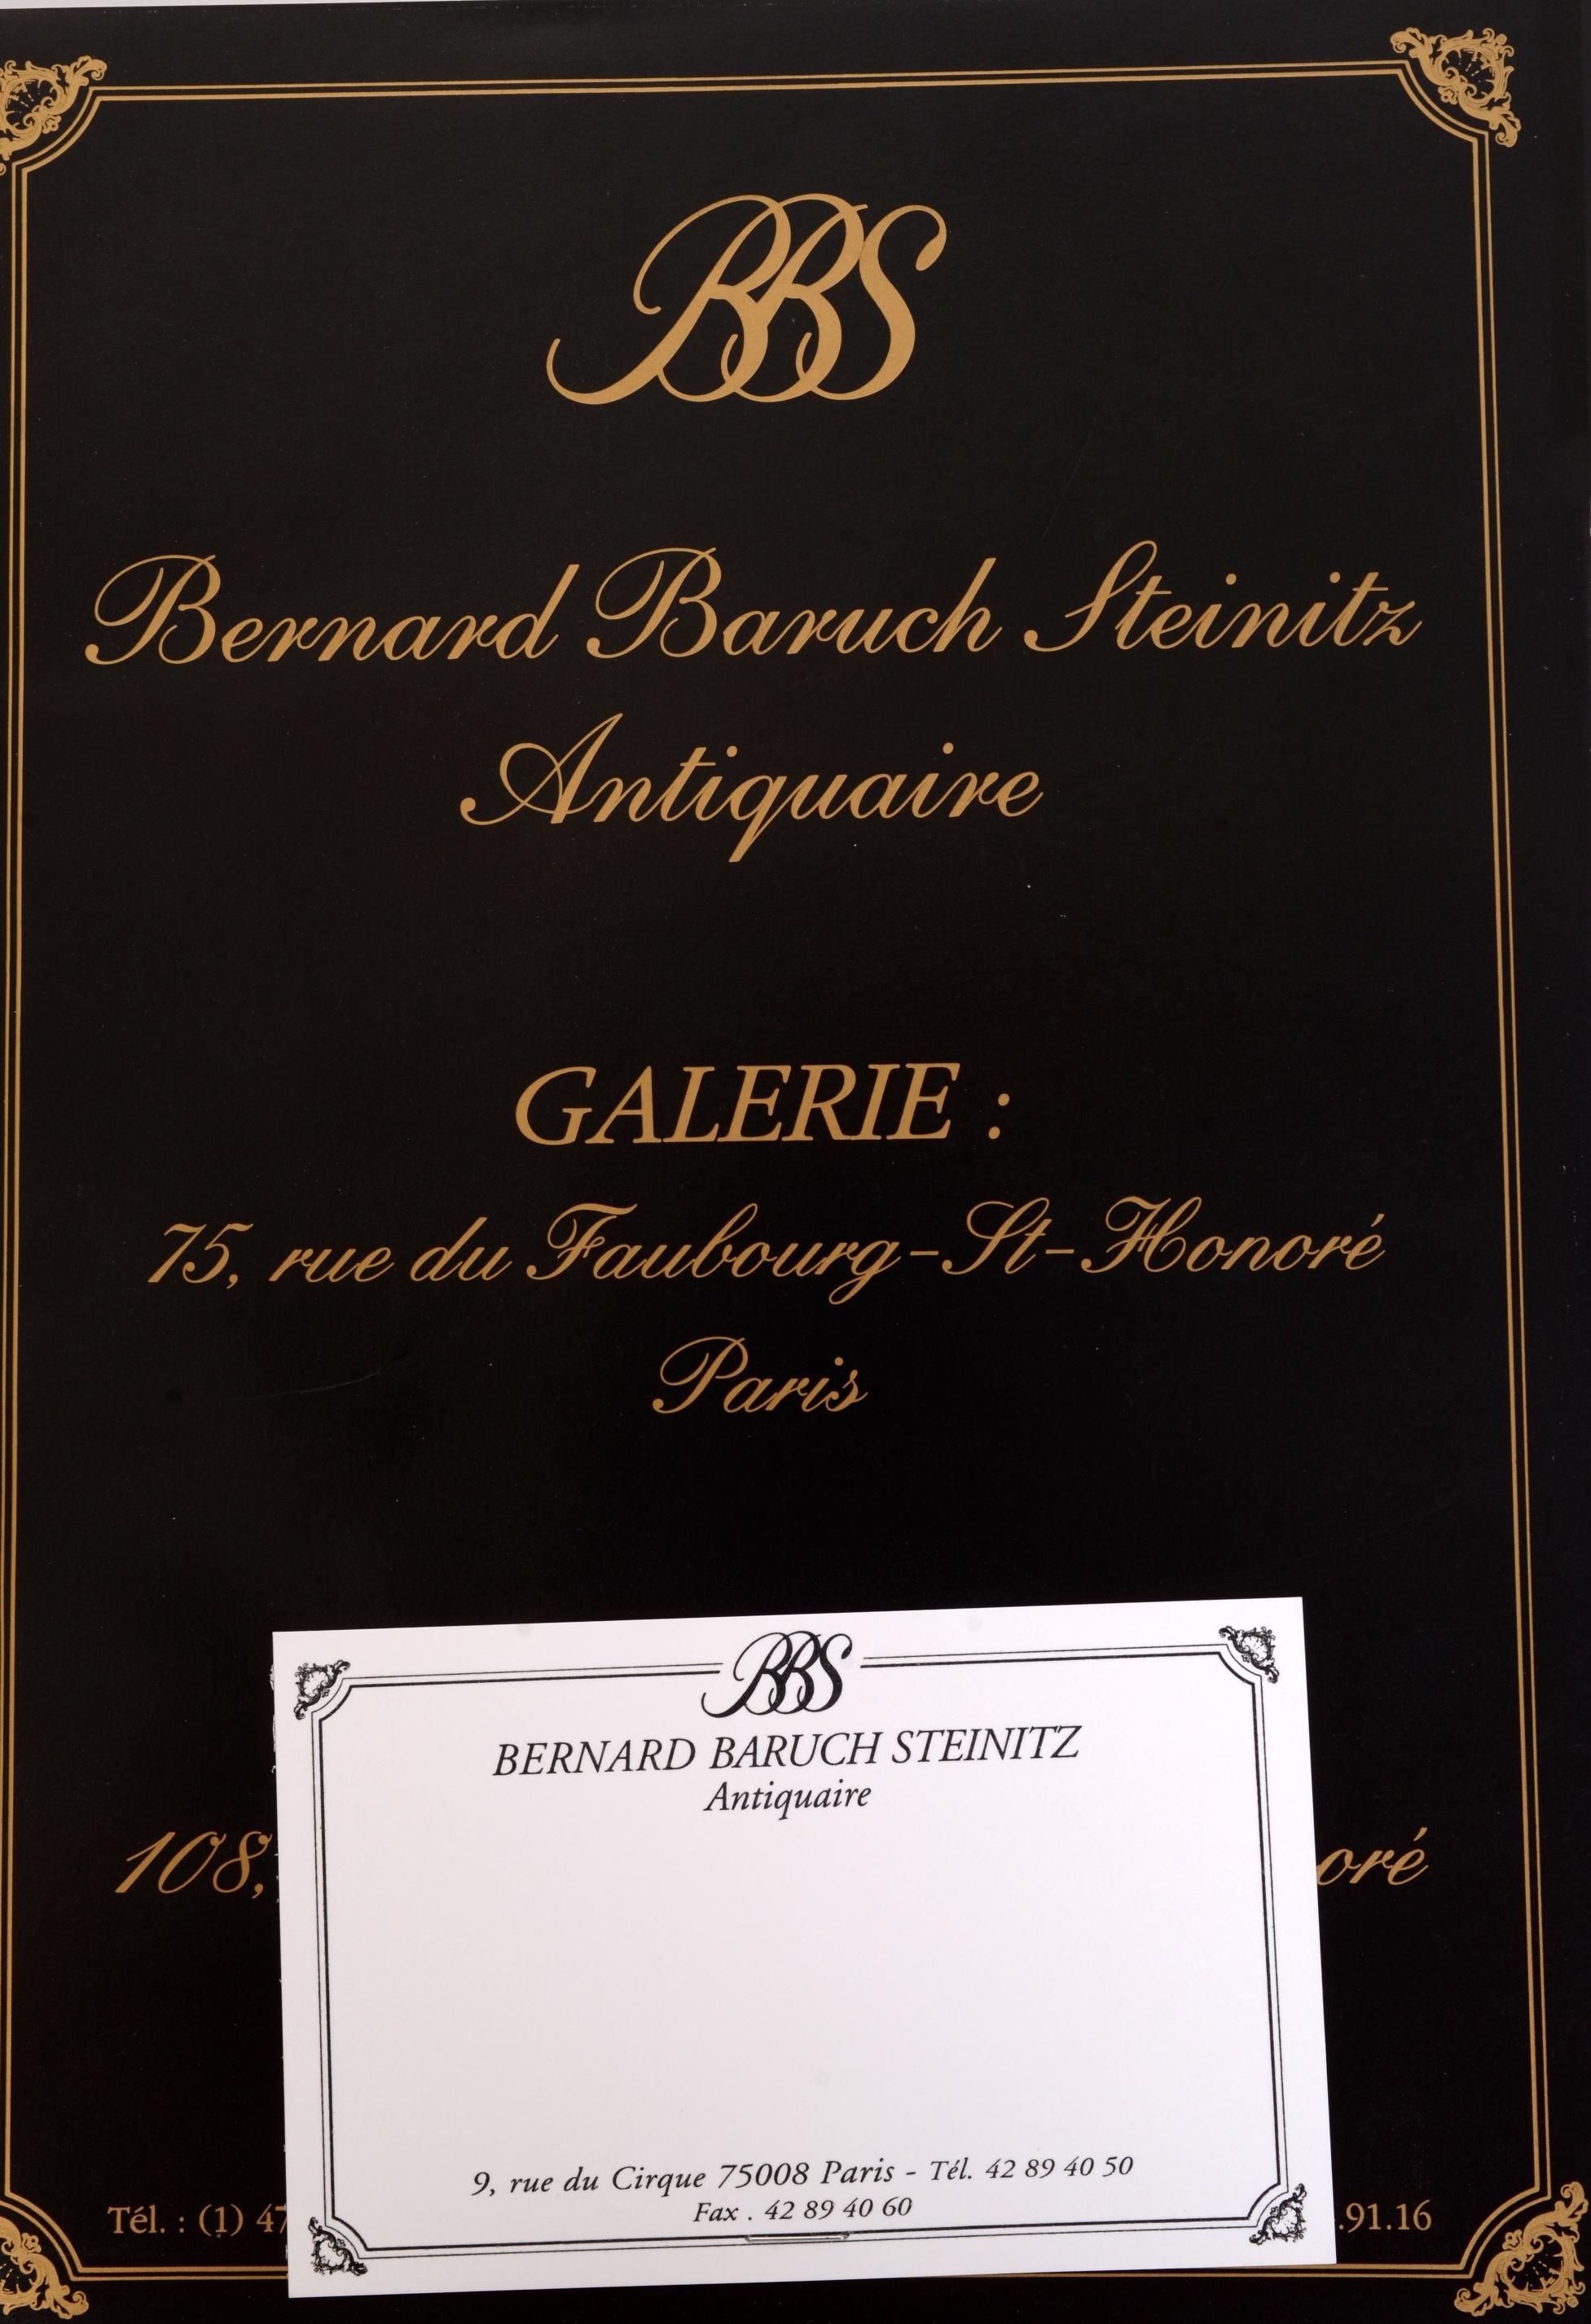 Bernard & Benjamin Steinitz - Antiquaires a Paris, Catalogue. 1st Ed softcover. A handsome catalogue of fine antiques and art by one of the world's leading dealers, Bernard Steinitz (1933-2012.) The catalogue discusses and is illustrated with color